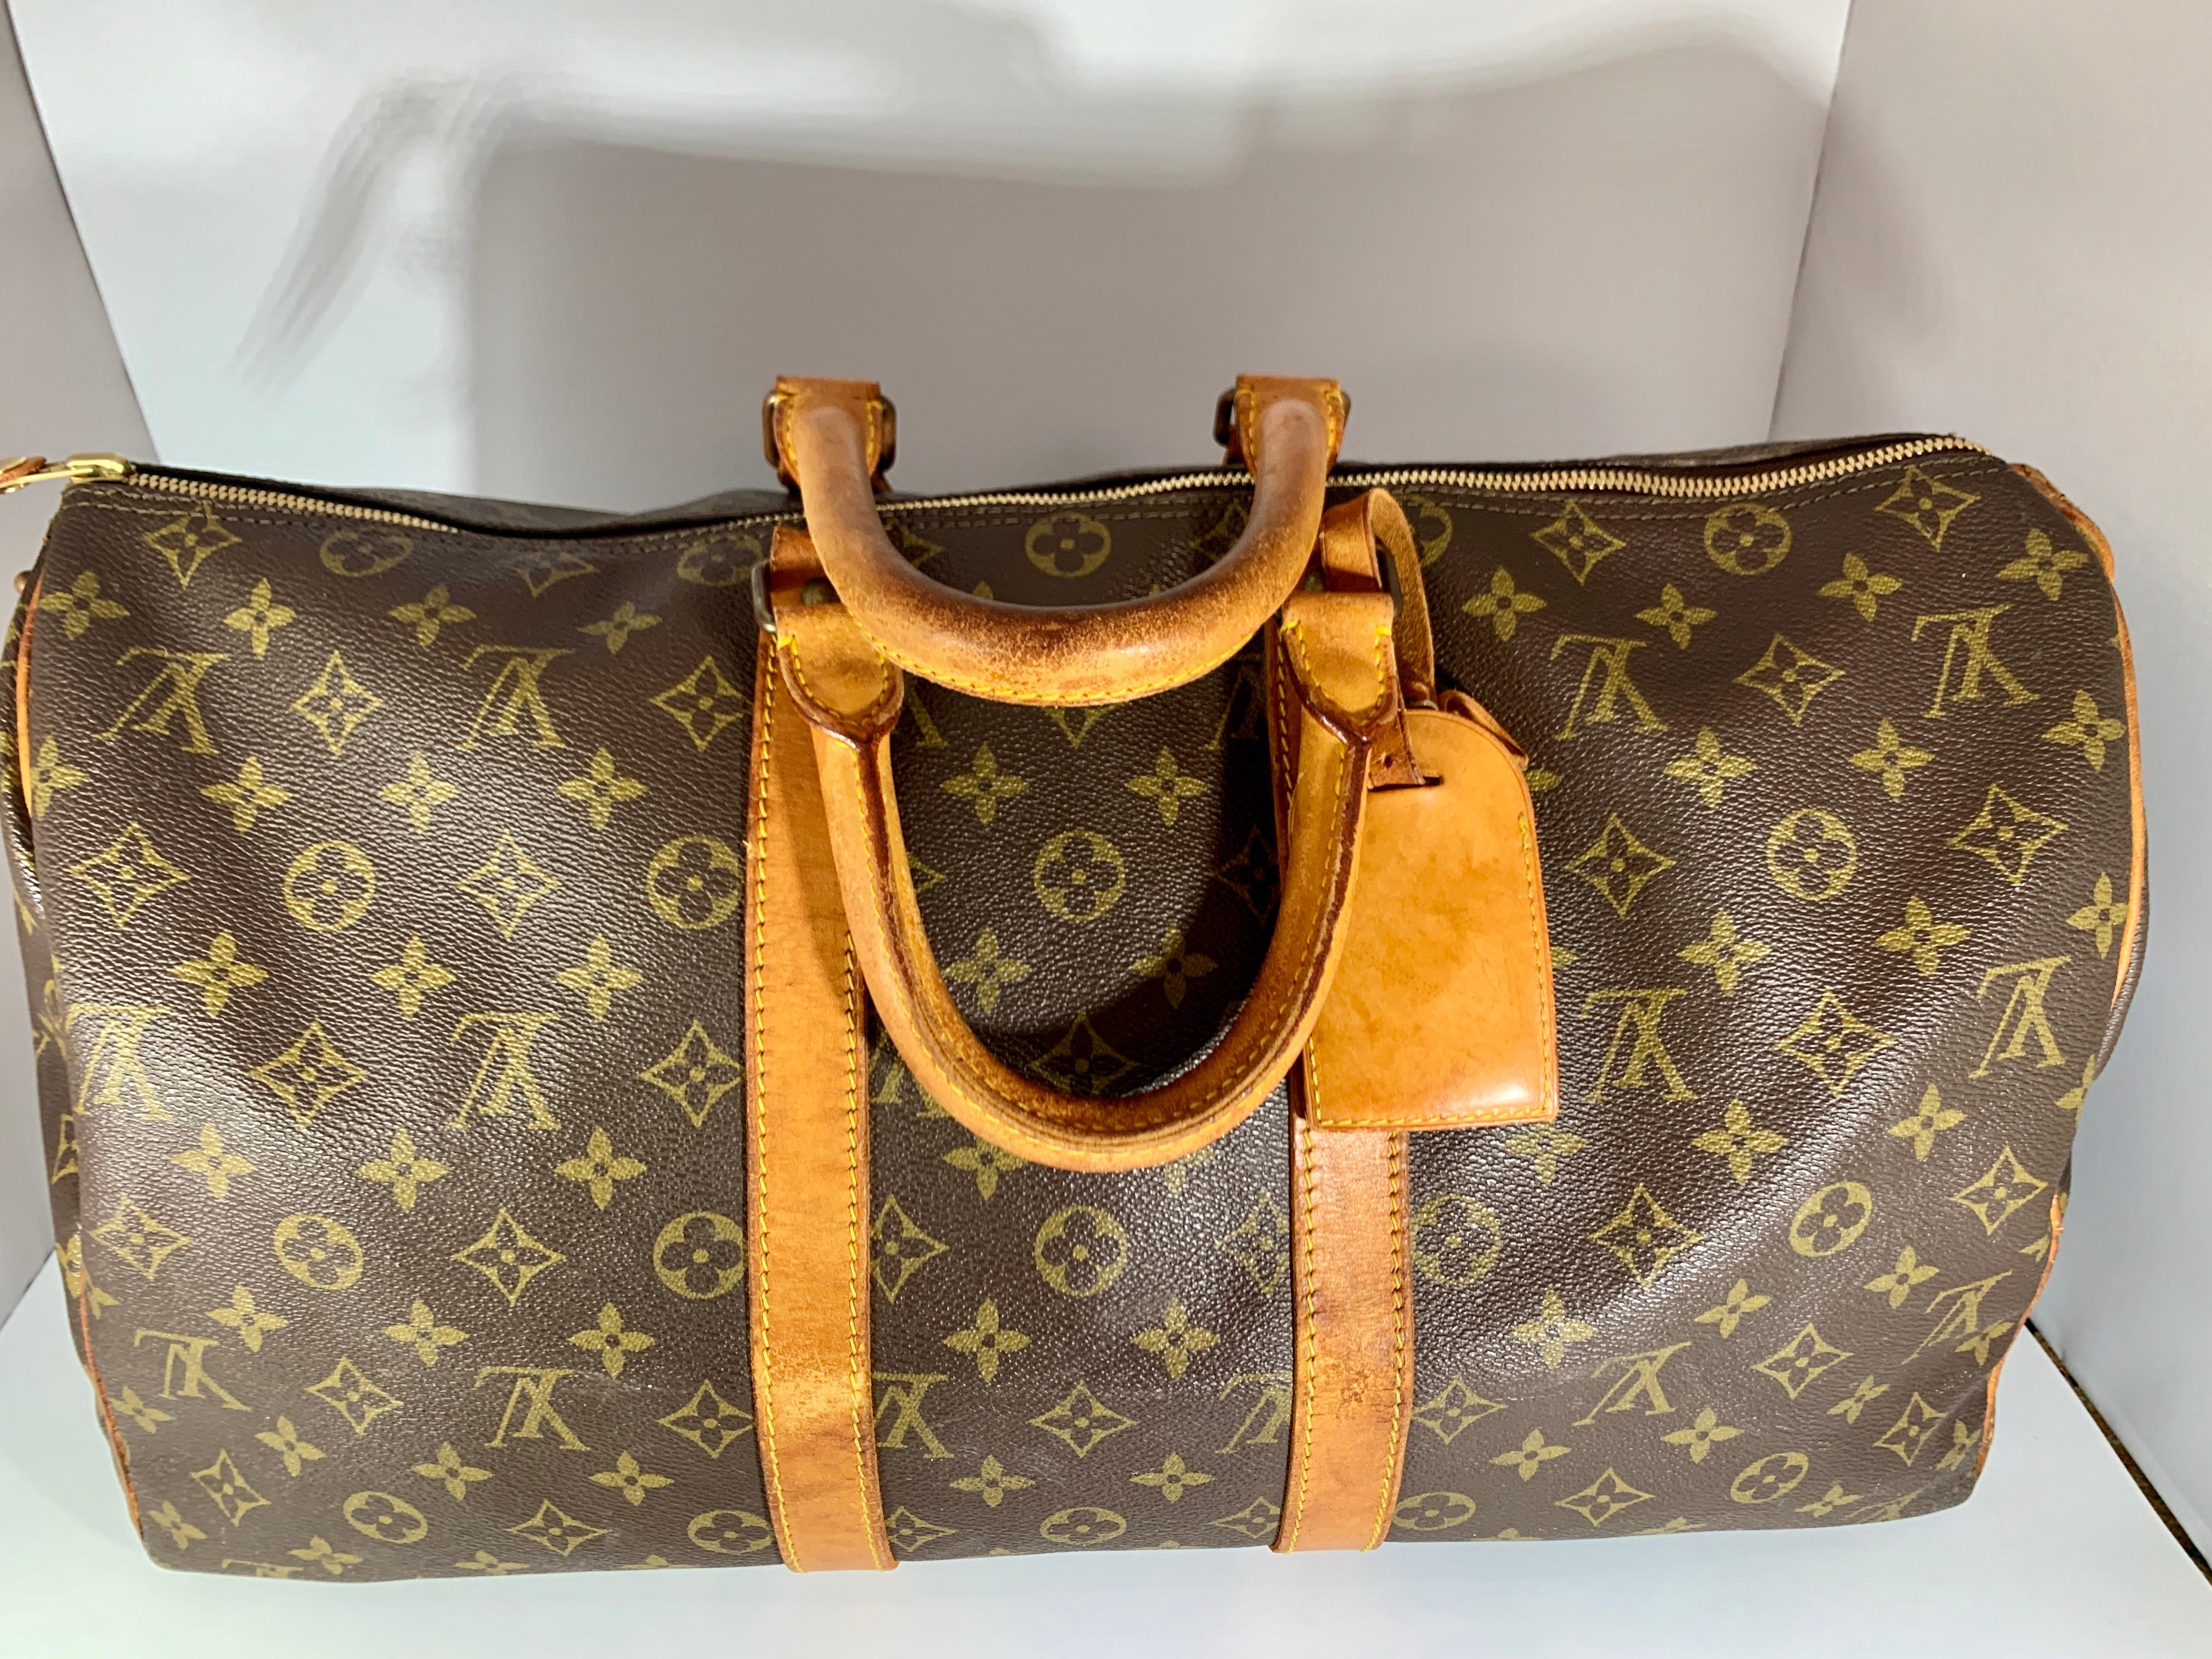 
LOUIS VUITTON
French Company Vintage Keepall 45
Description
Brown and tan monogram coated canvas vintage Louis Vuitton French Company Keepall 45 with brass hardware, dual rolled top handles, tan vachetta leather trim, brown canvas interior and zip